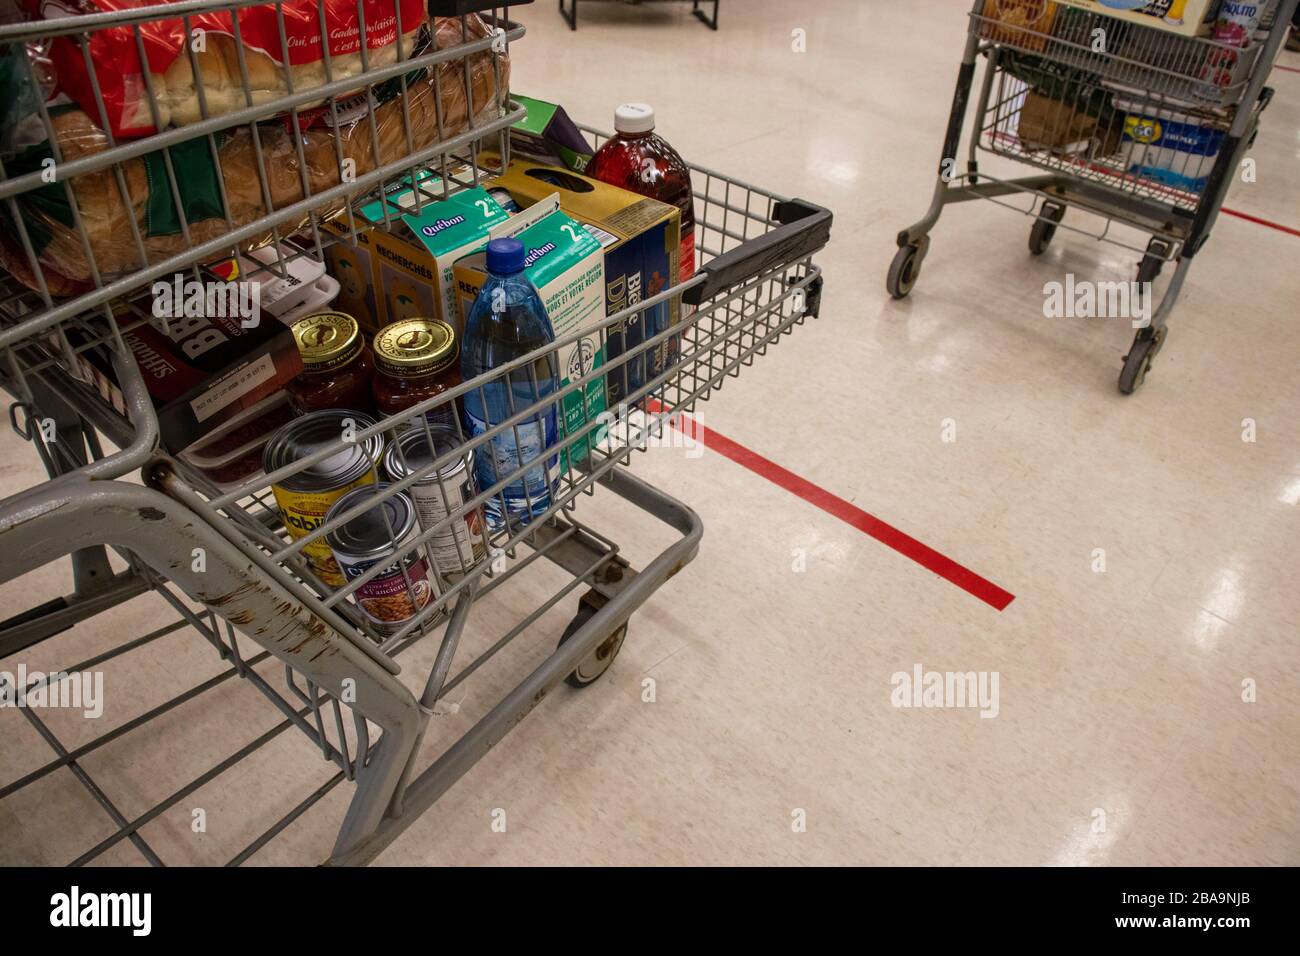 March 23, 2020 - Montreal, Qc, Canada : Line up and grocery Carts with decals markers on floor, supermarket, Coronavirus (COVID-19) Pandemic Crisis Stock Photo